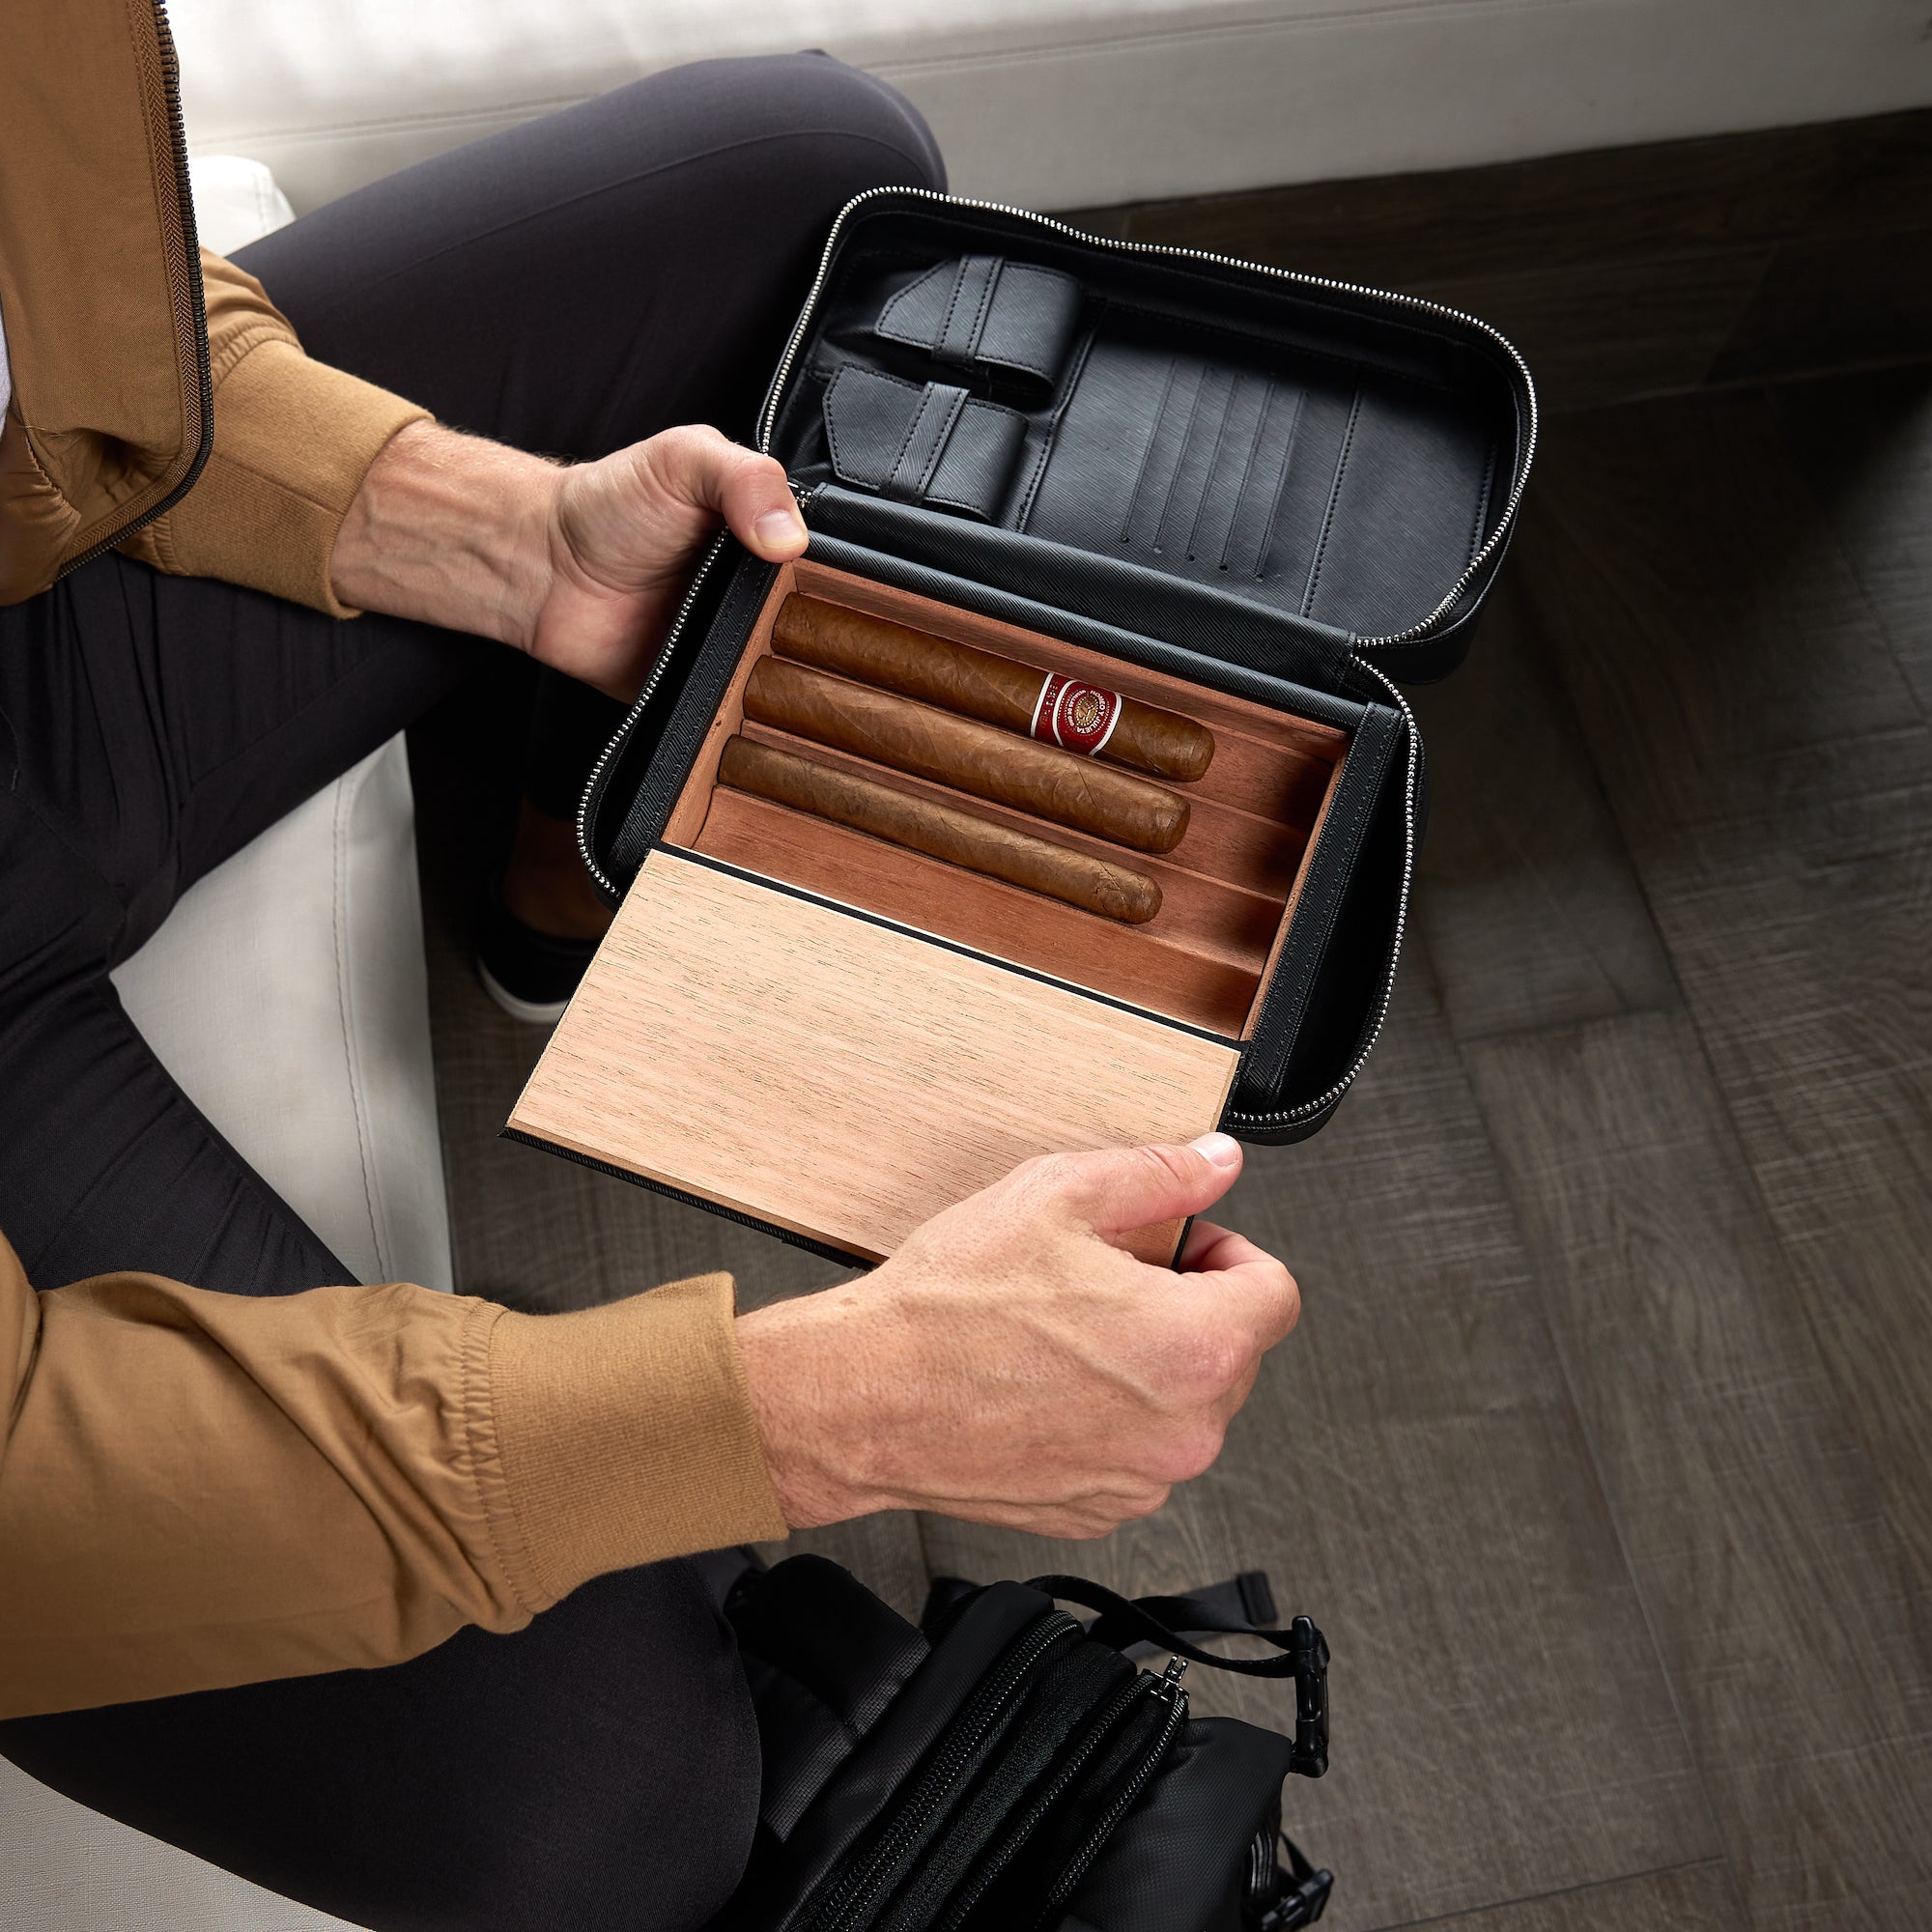 Portable Travel Cigar Humidor Leather Case with Cutter – Ashtray